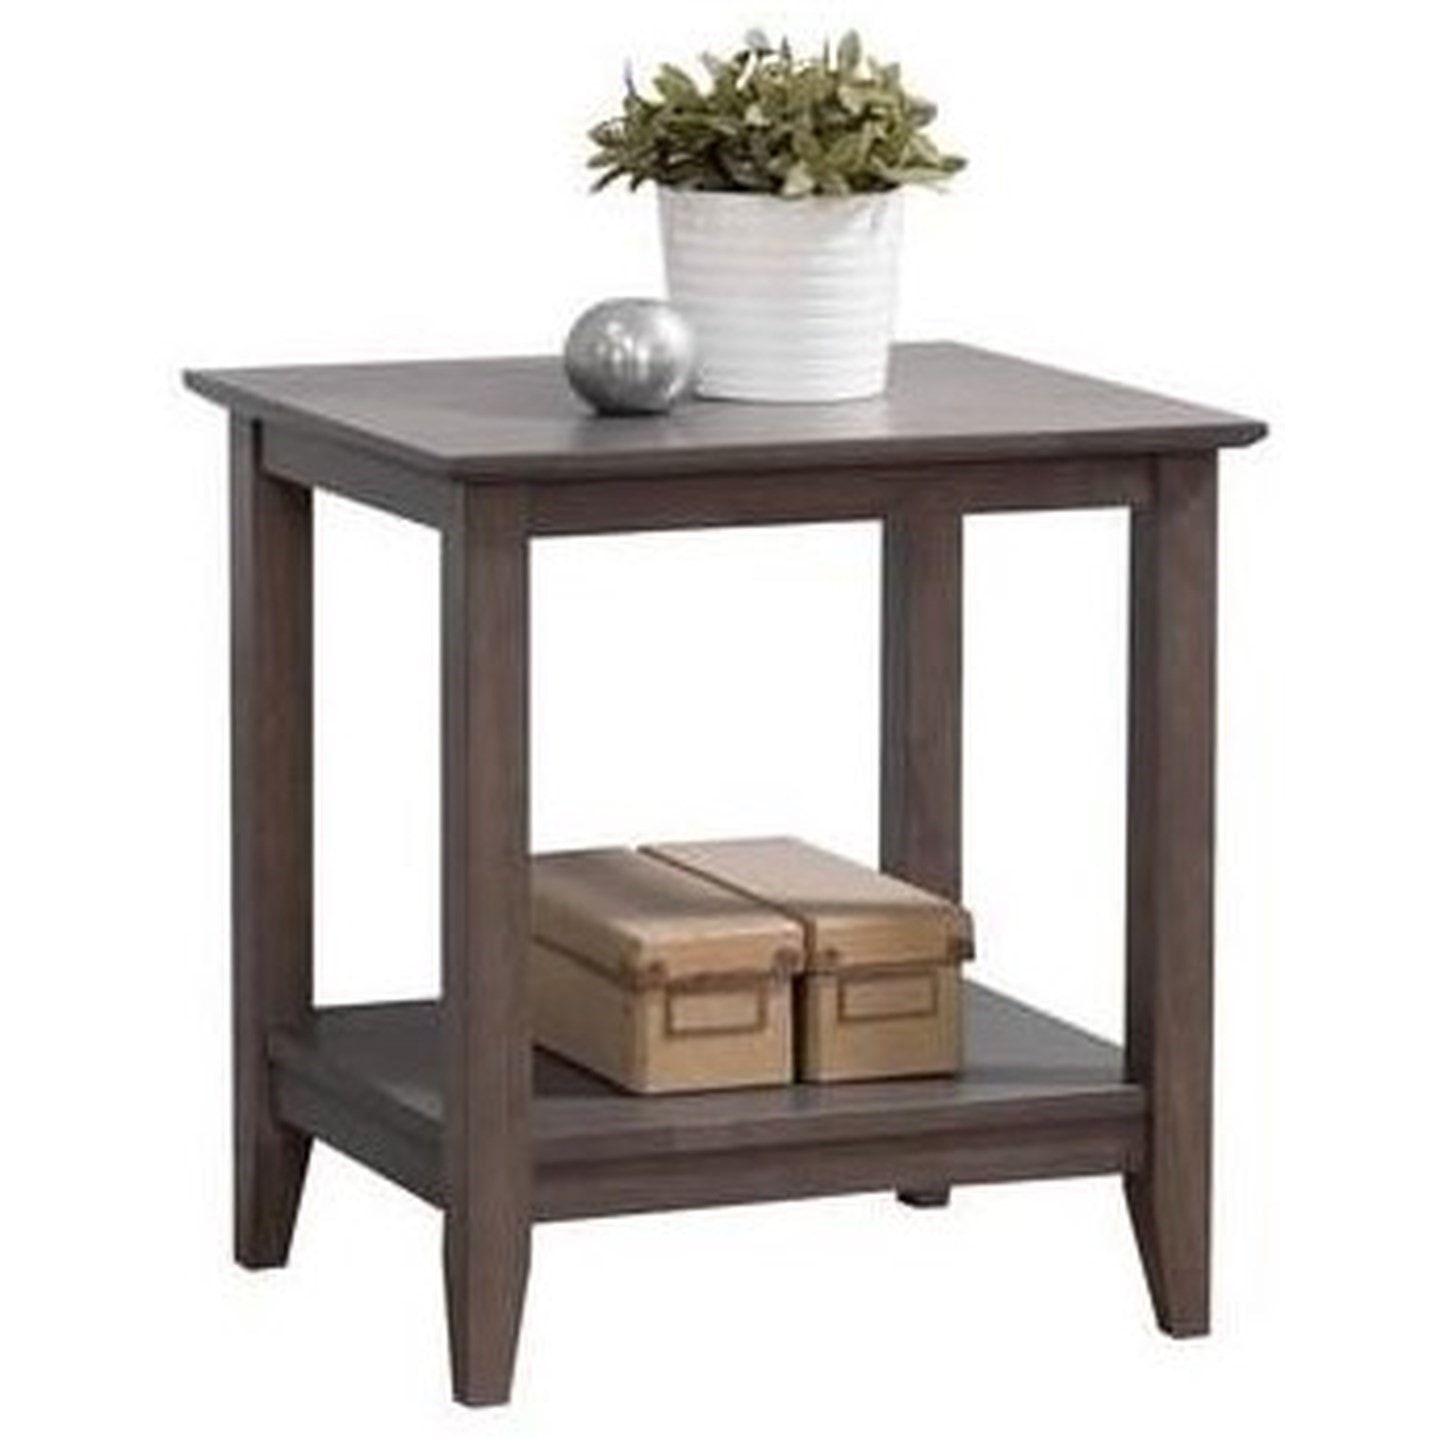 Shop the End Table from Option 1